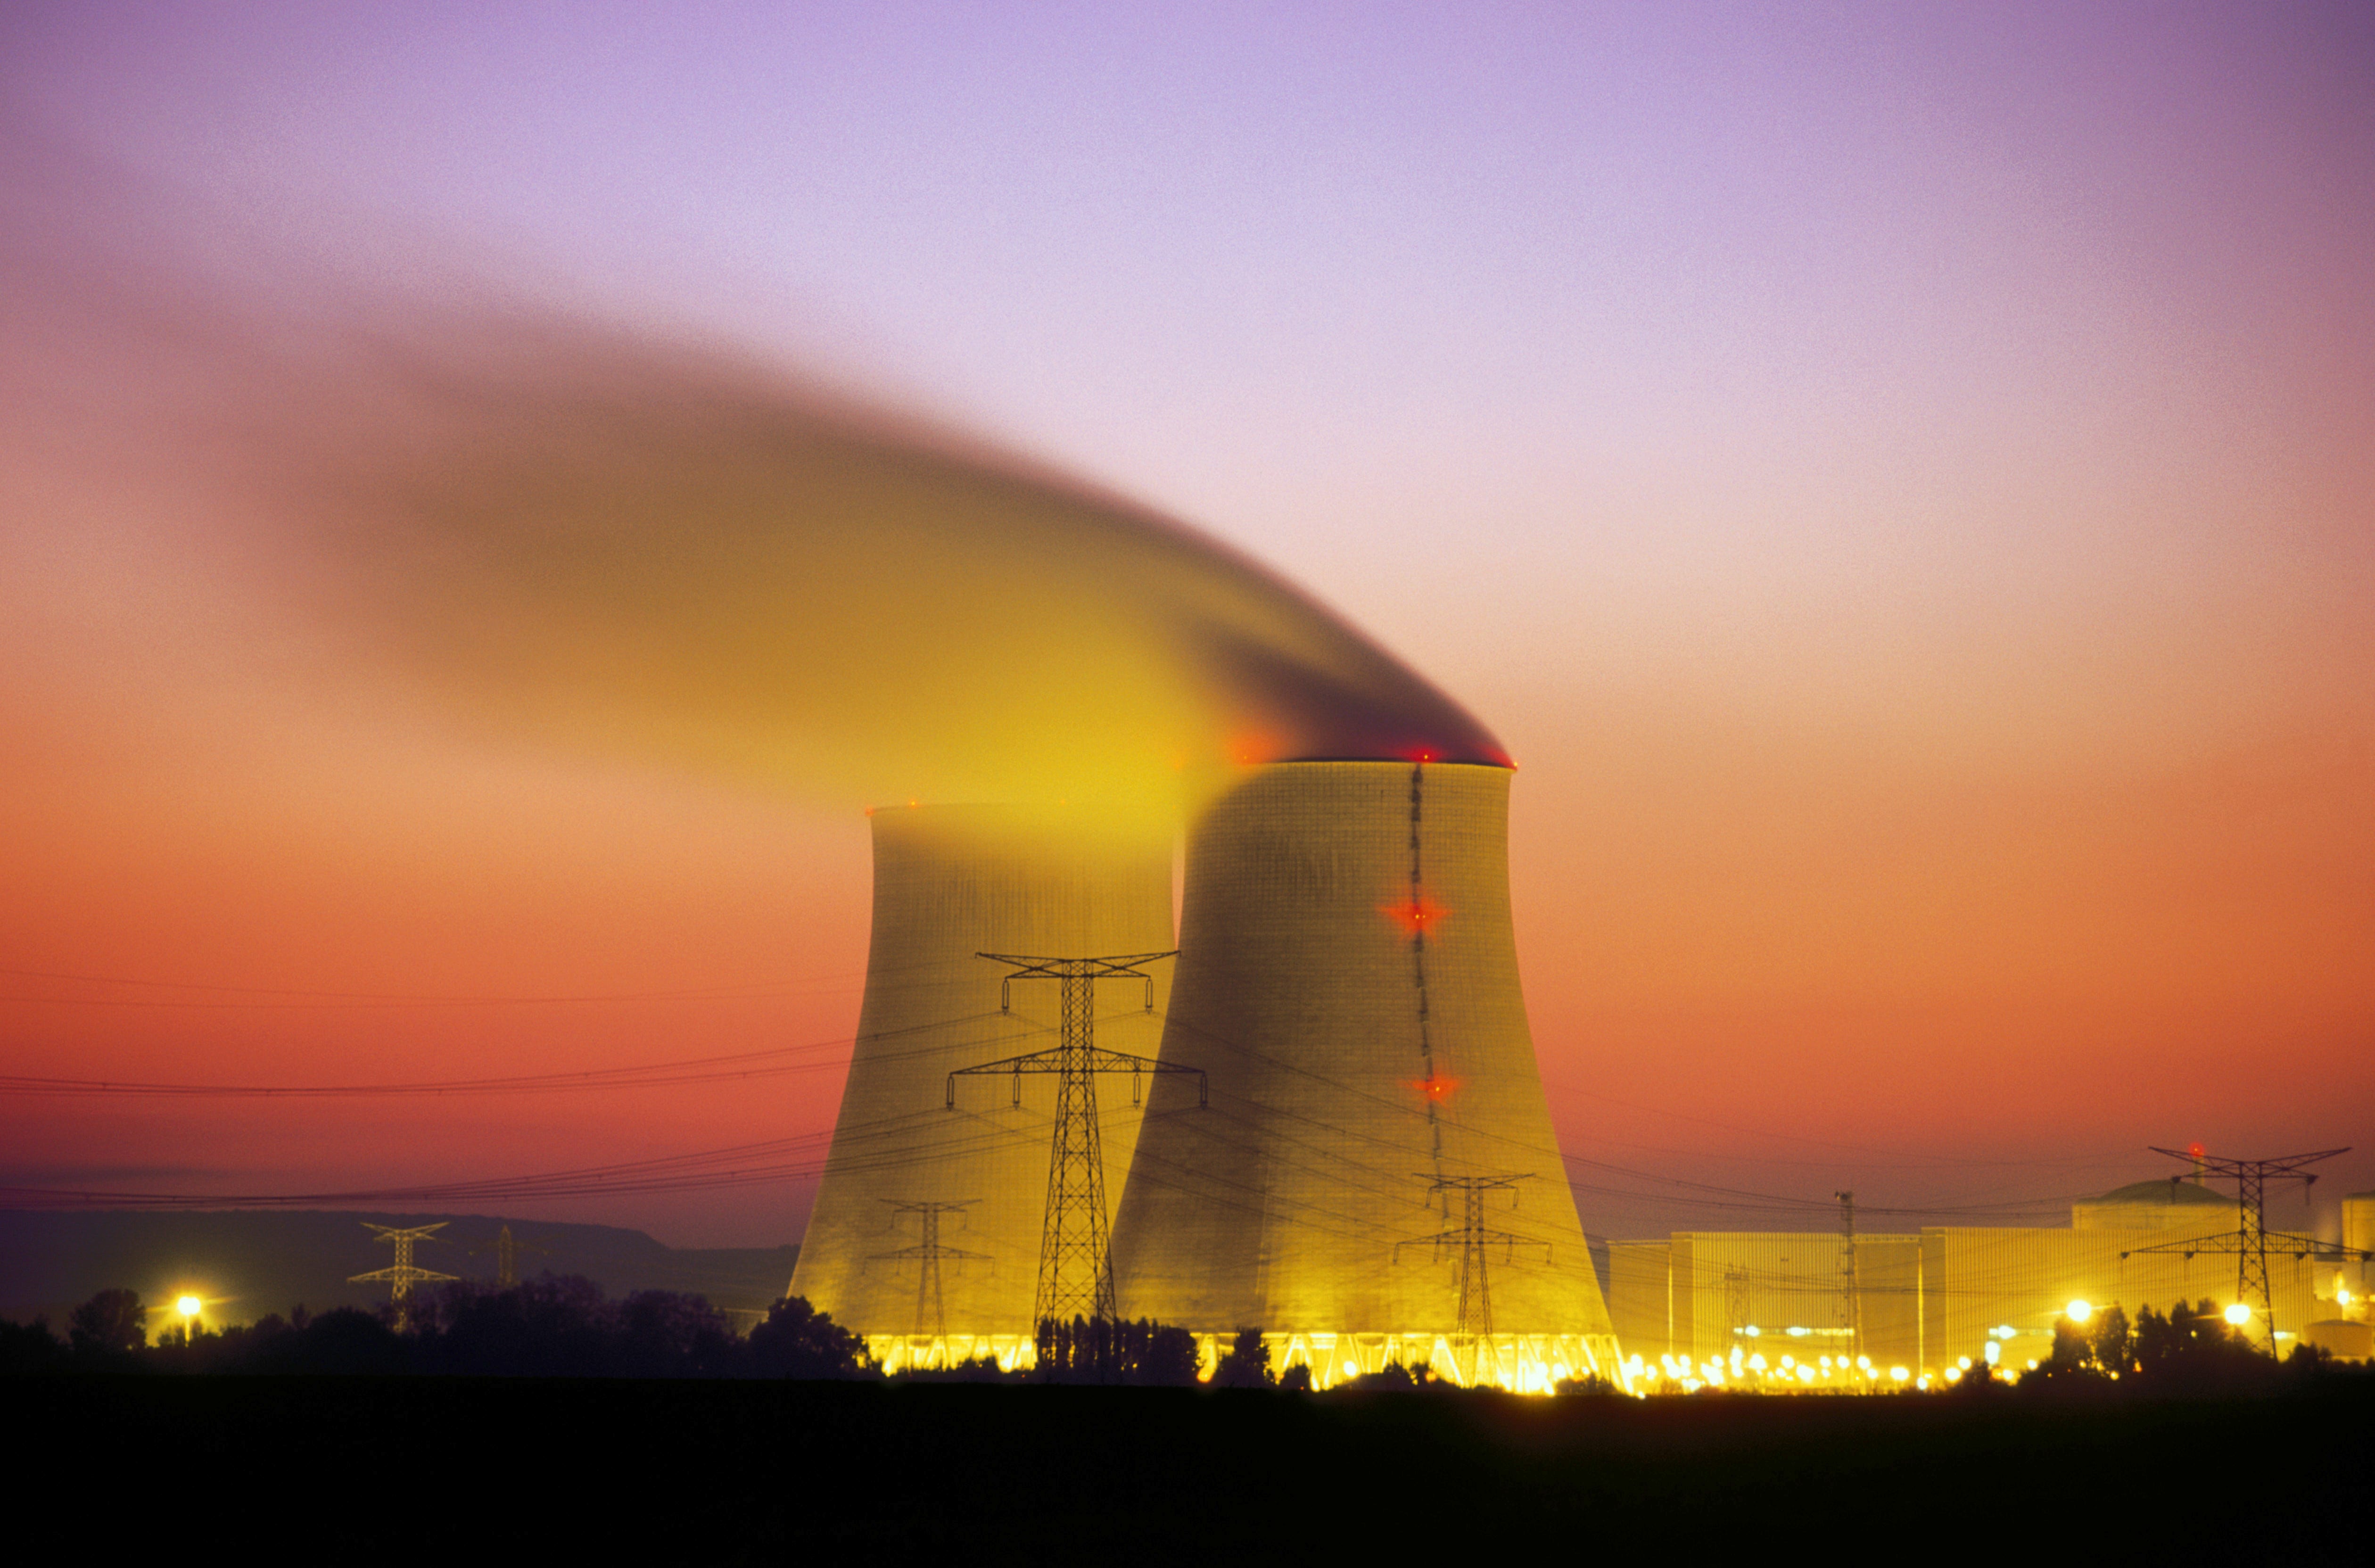 25 Percent of Nuclear Power Plants Risk Closure in the U.S.